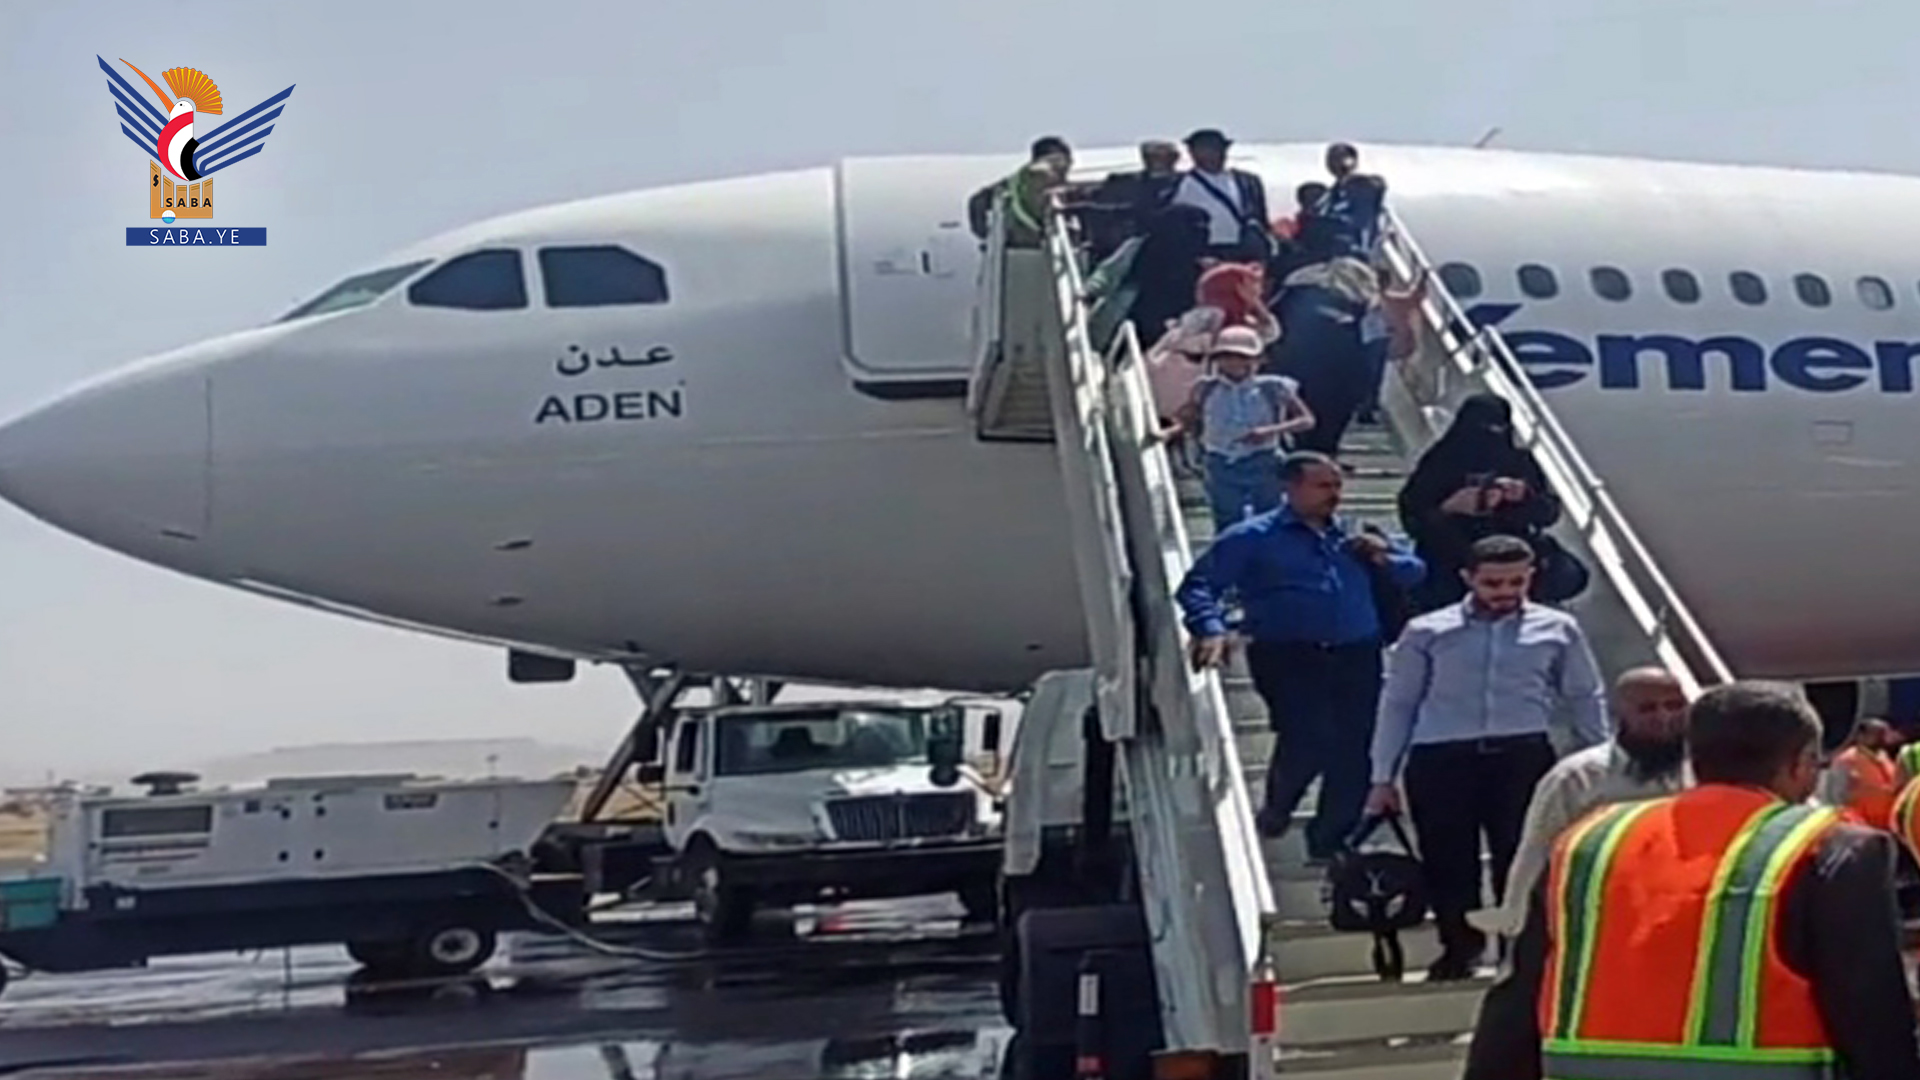 Arrival, departure of Yemen Airlines aircraft from Sana'a Inte'l Airport